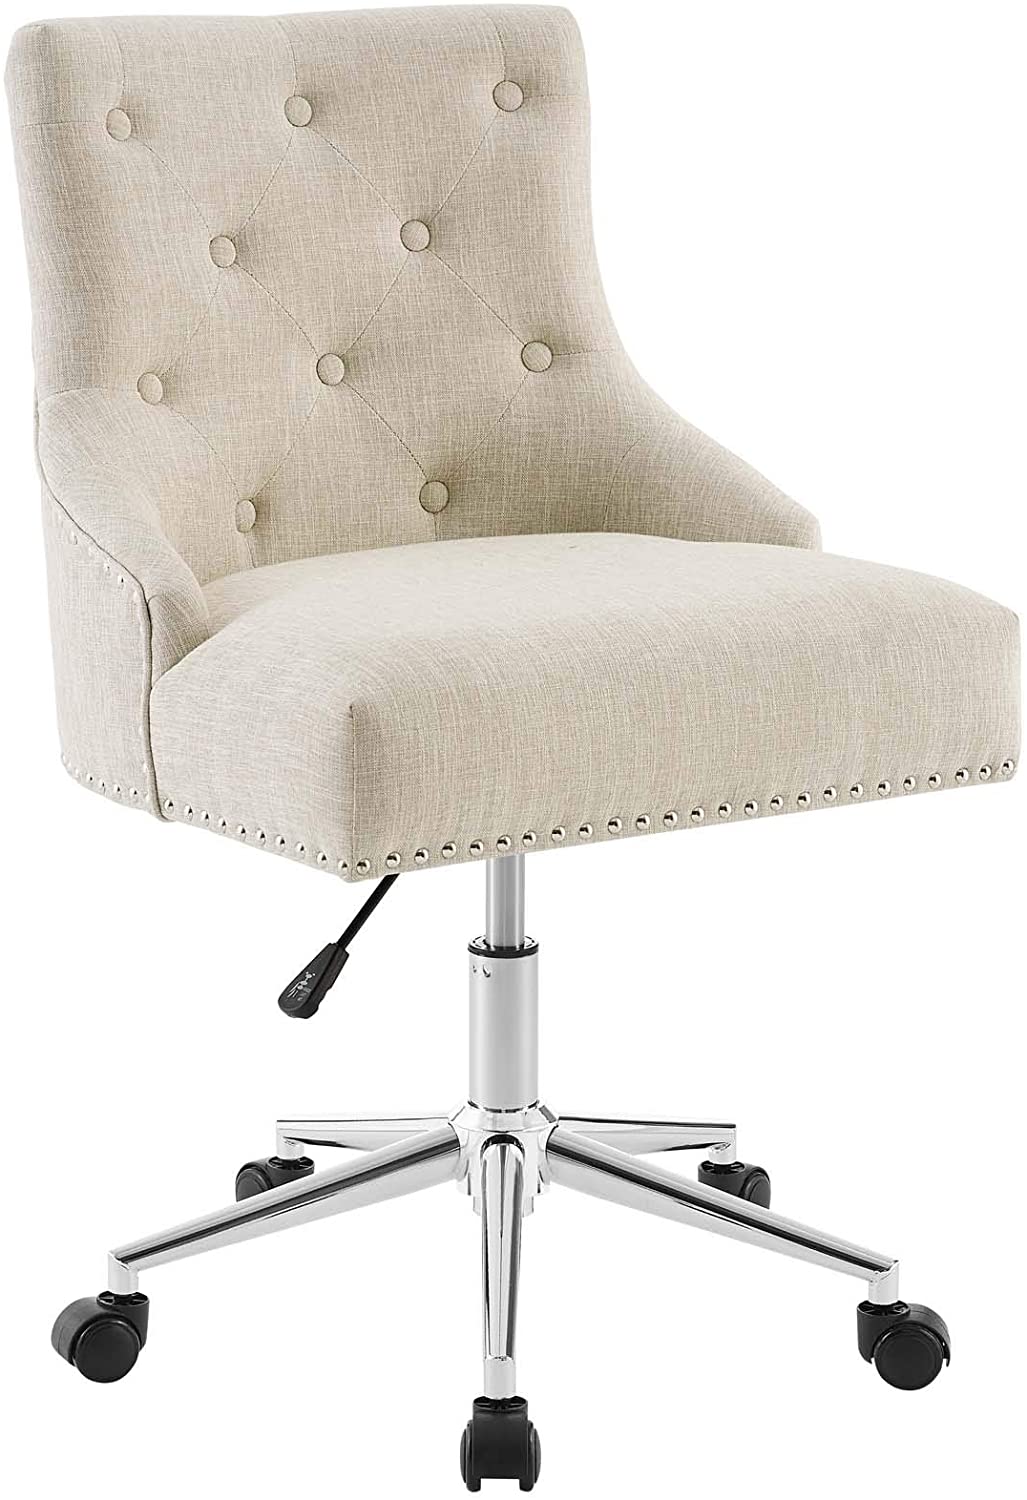 Modway Regent Tufted Button Upholstered Fabric Swivel Office Chair